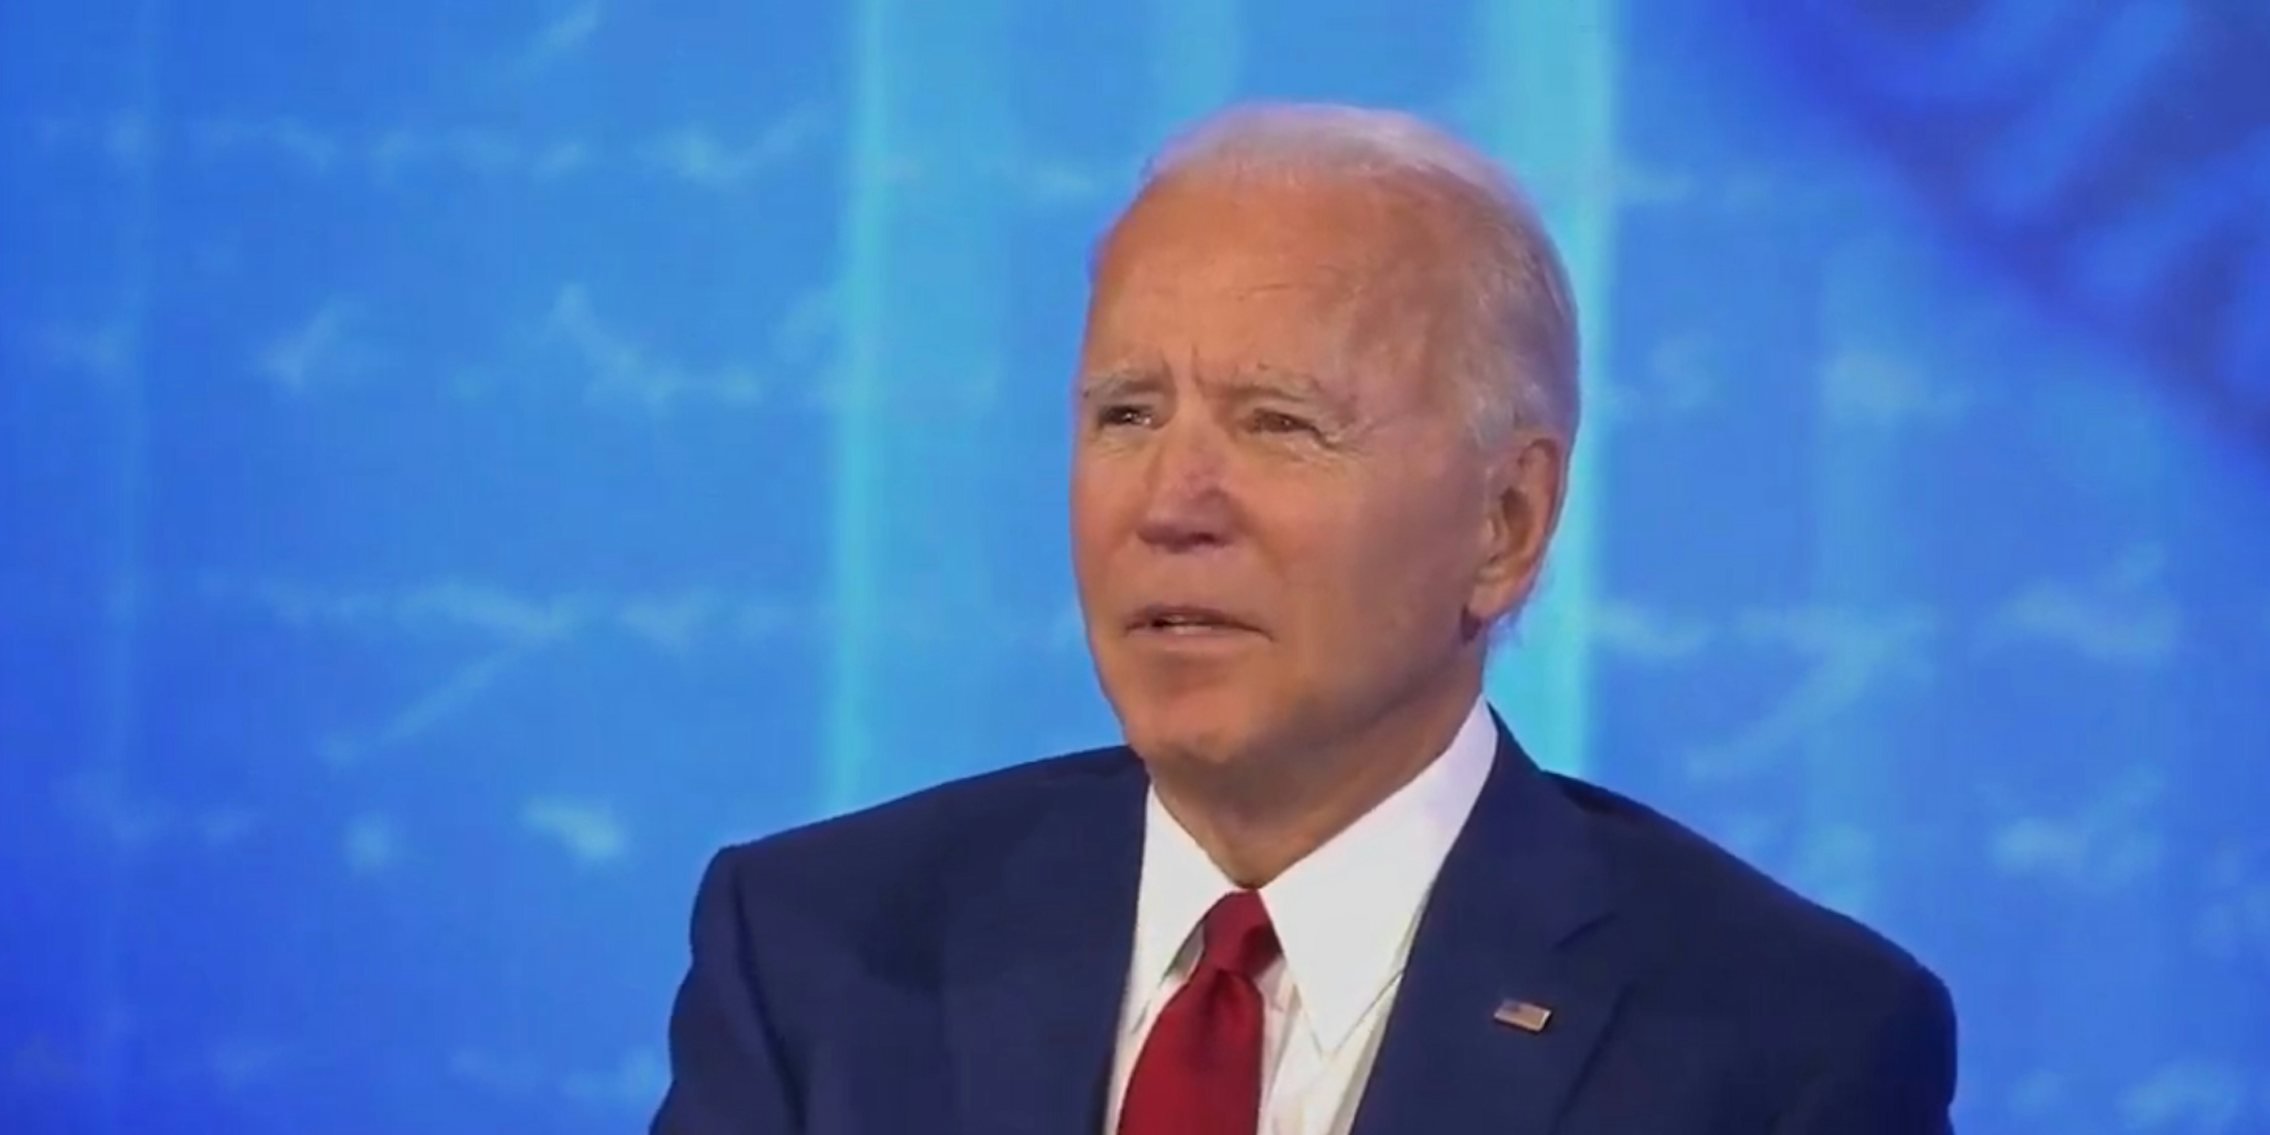 Joe Biden tells police to 'shoot them in the leg' at the town hall